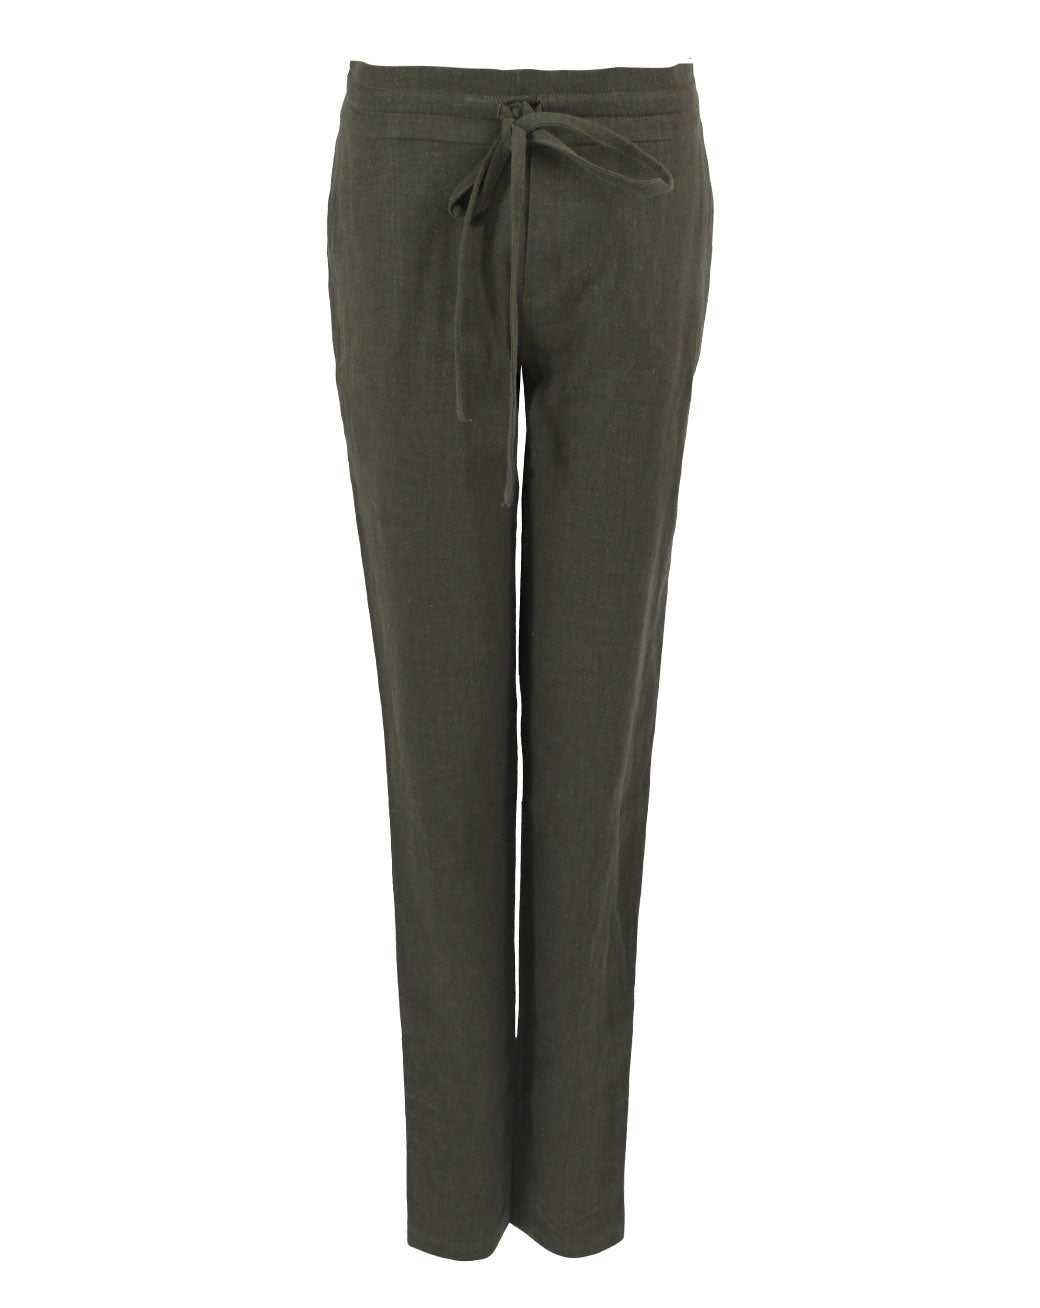 clothing tall women longlady pants norelle